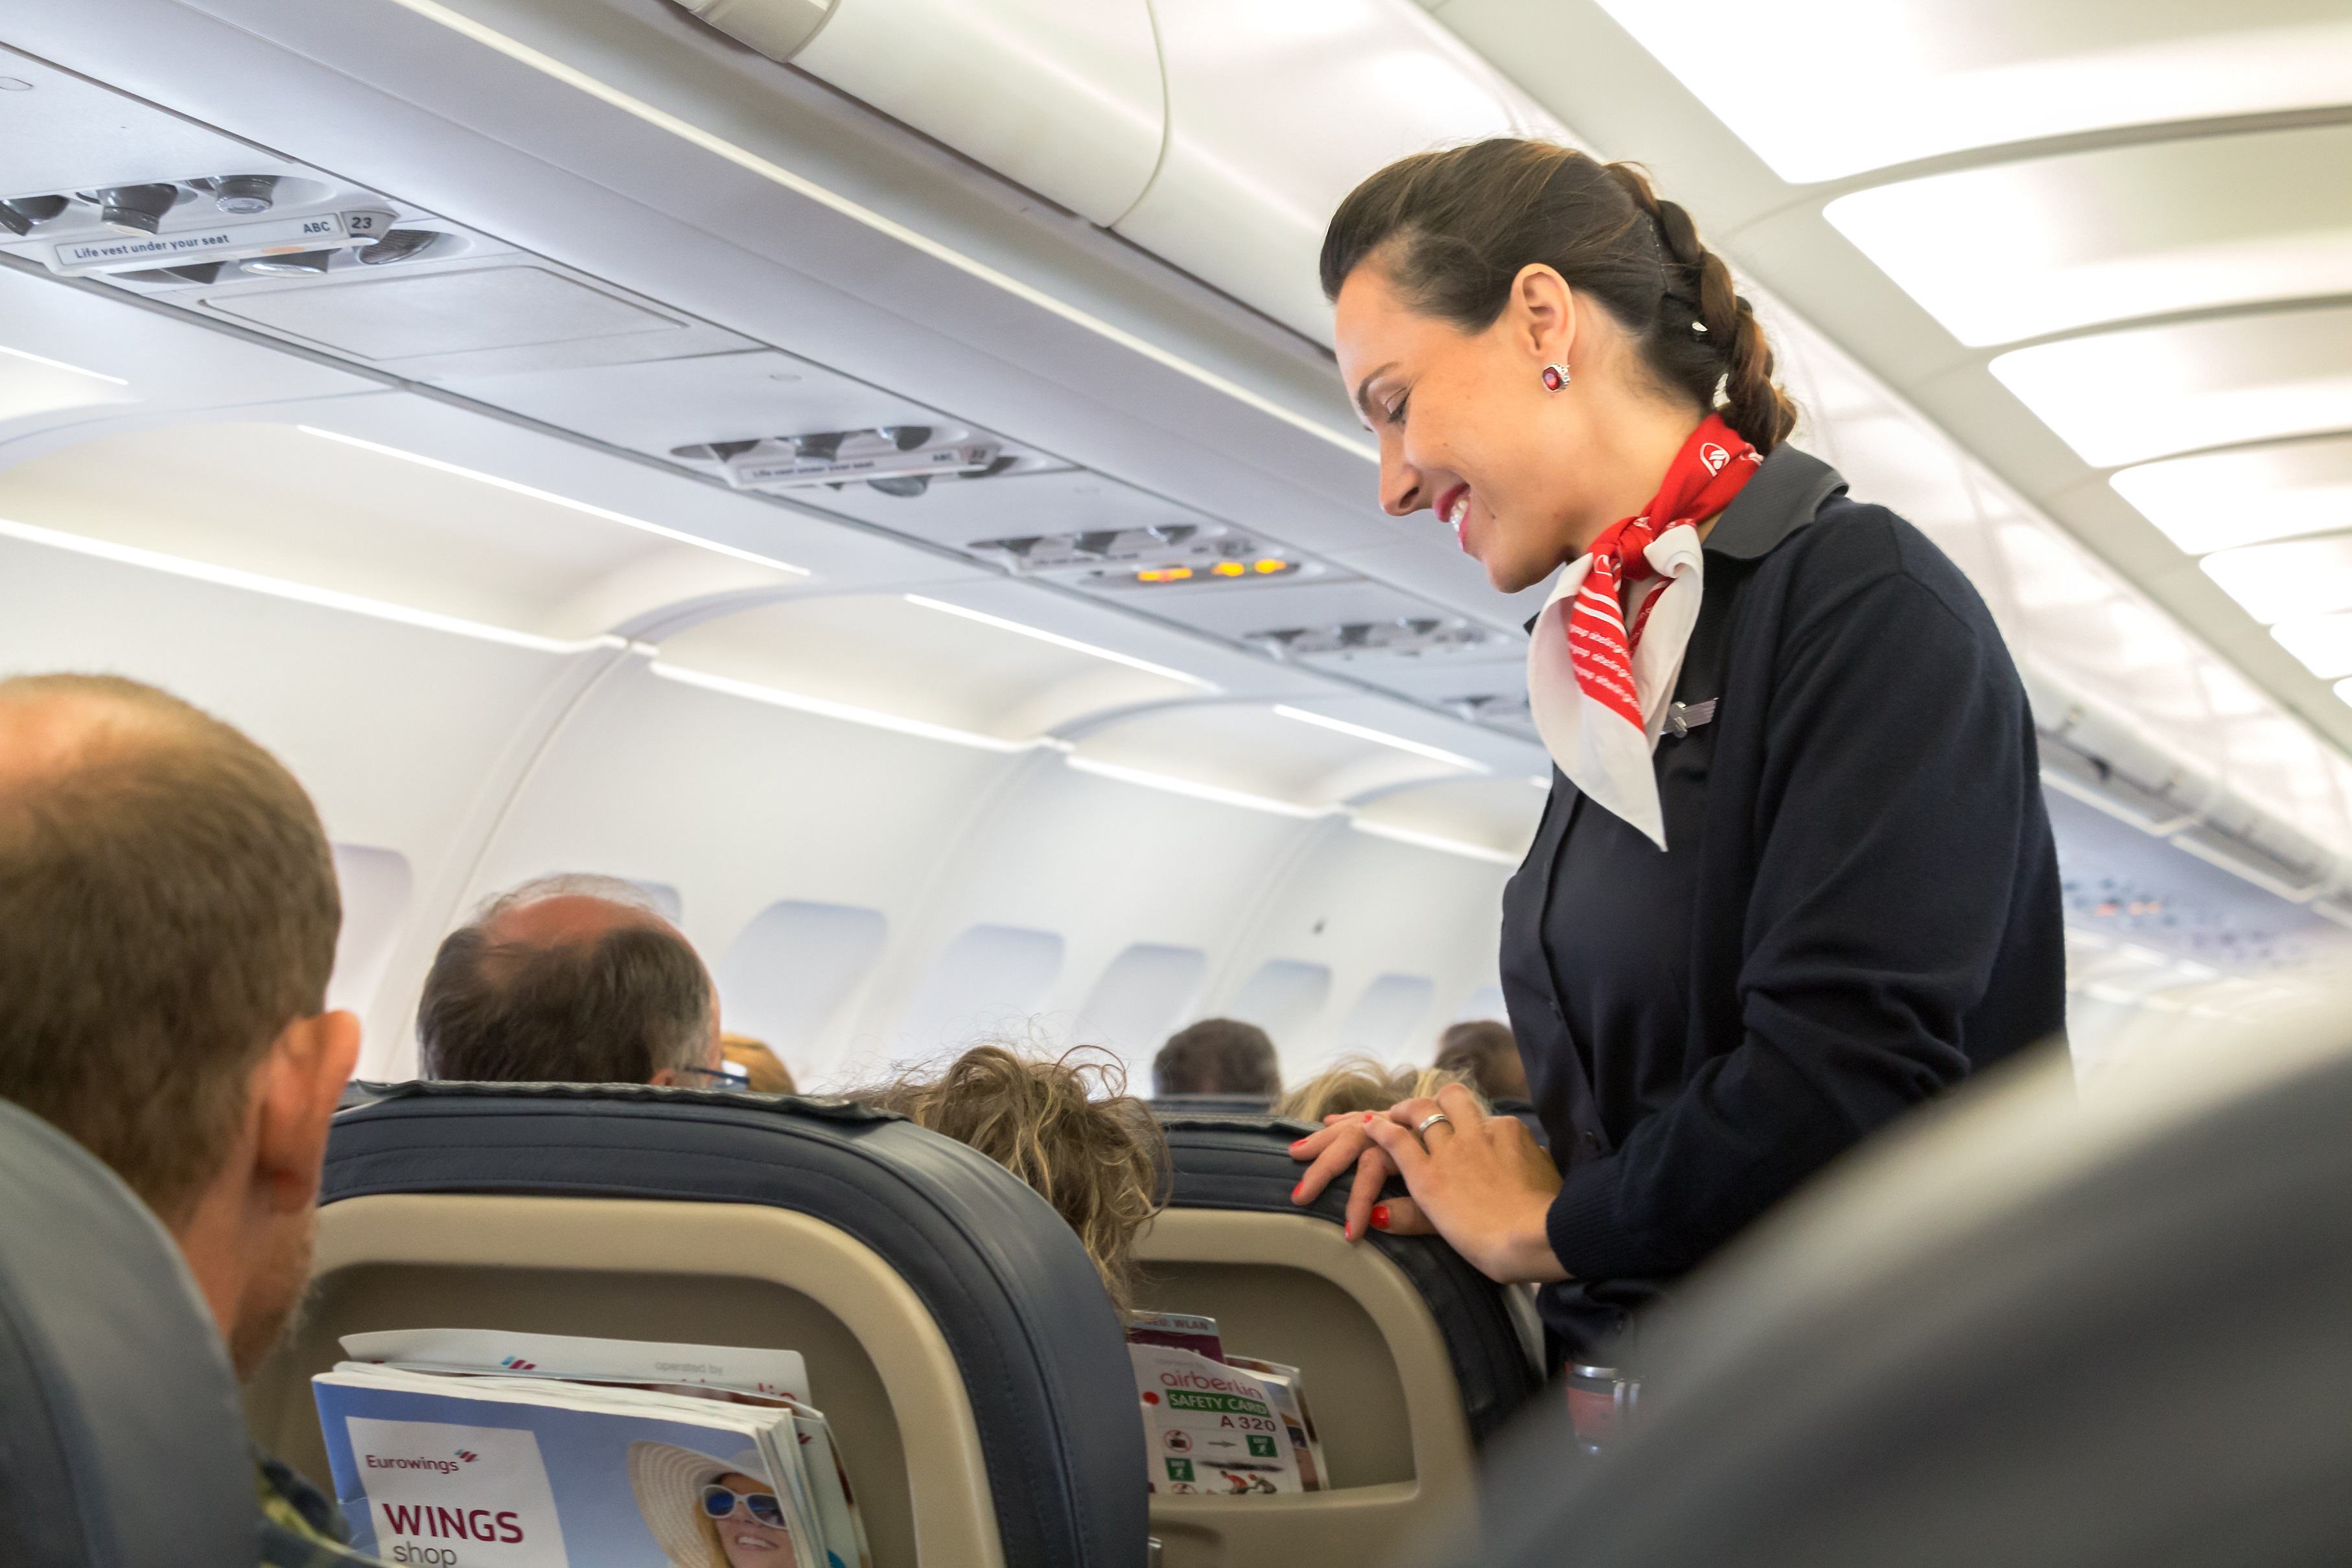 Surprising Reasons Flight Attendants Have Been Fired from Their Jobs